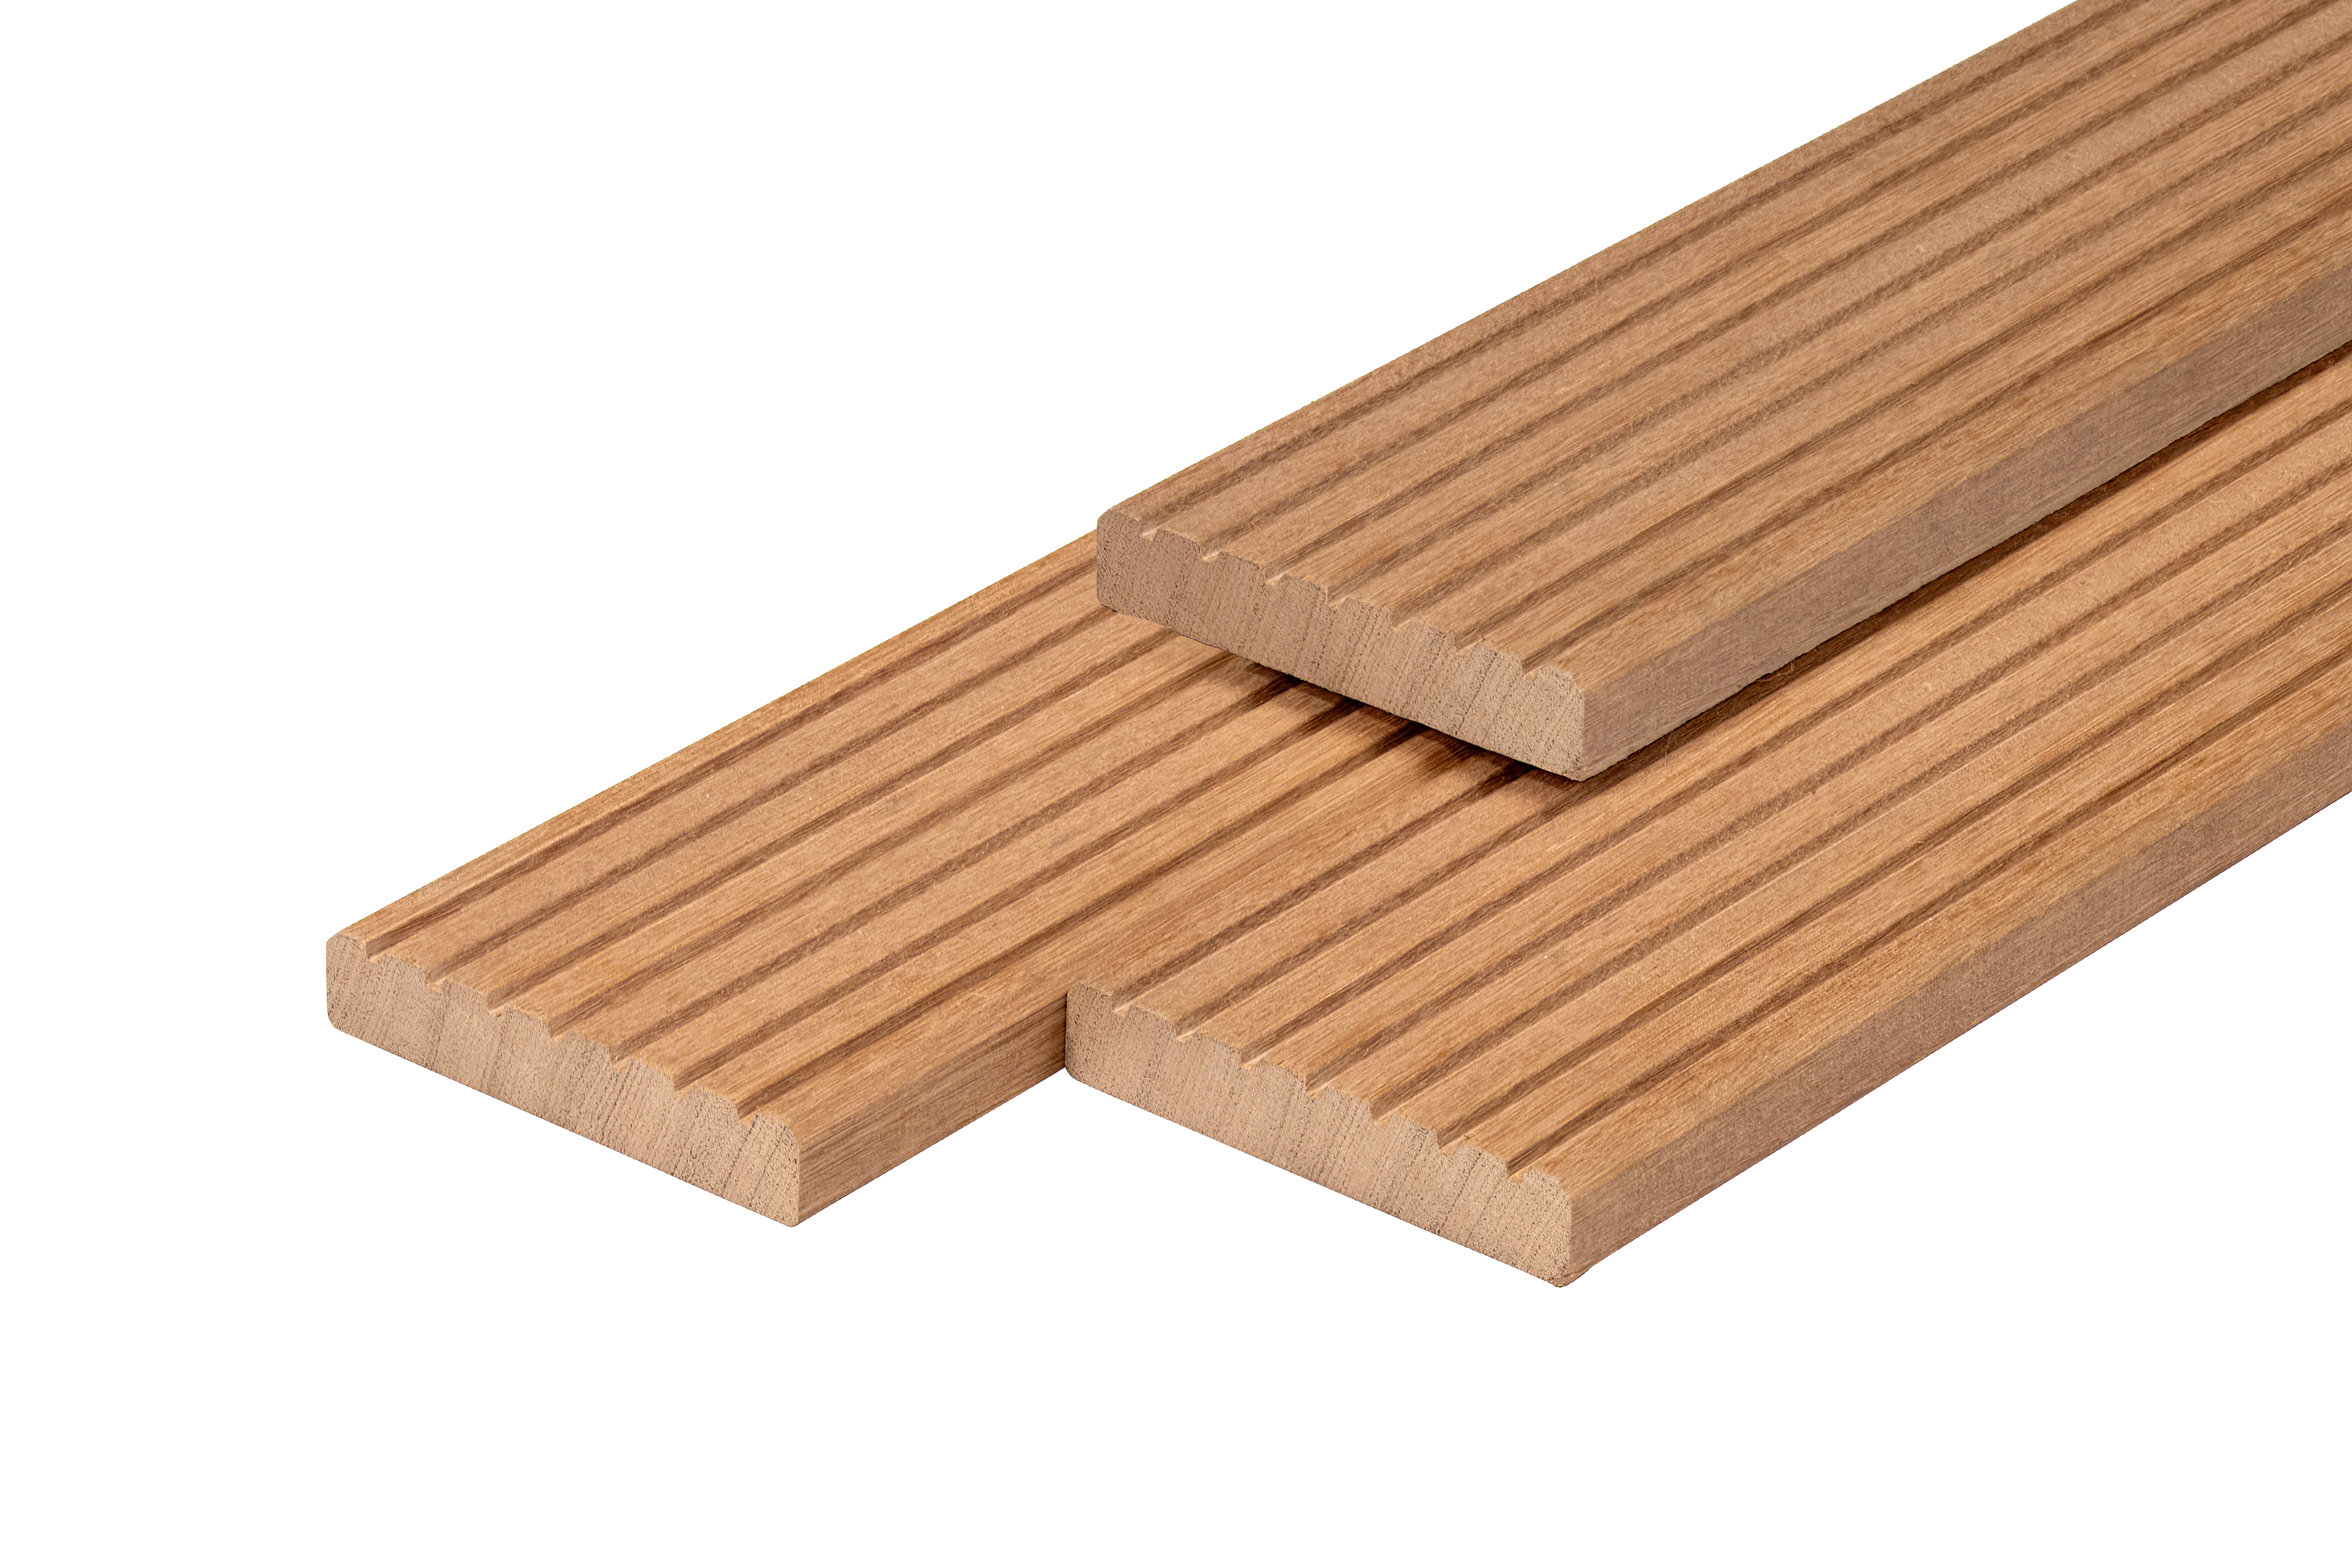 Bangkirai decking board dried 2.5x14.5x490 cm planed 7 grooves + 1 side smooth